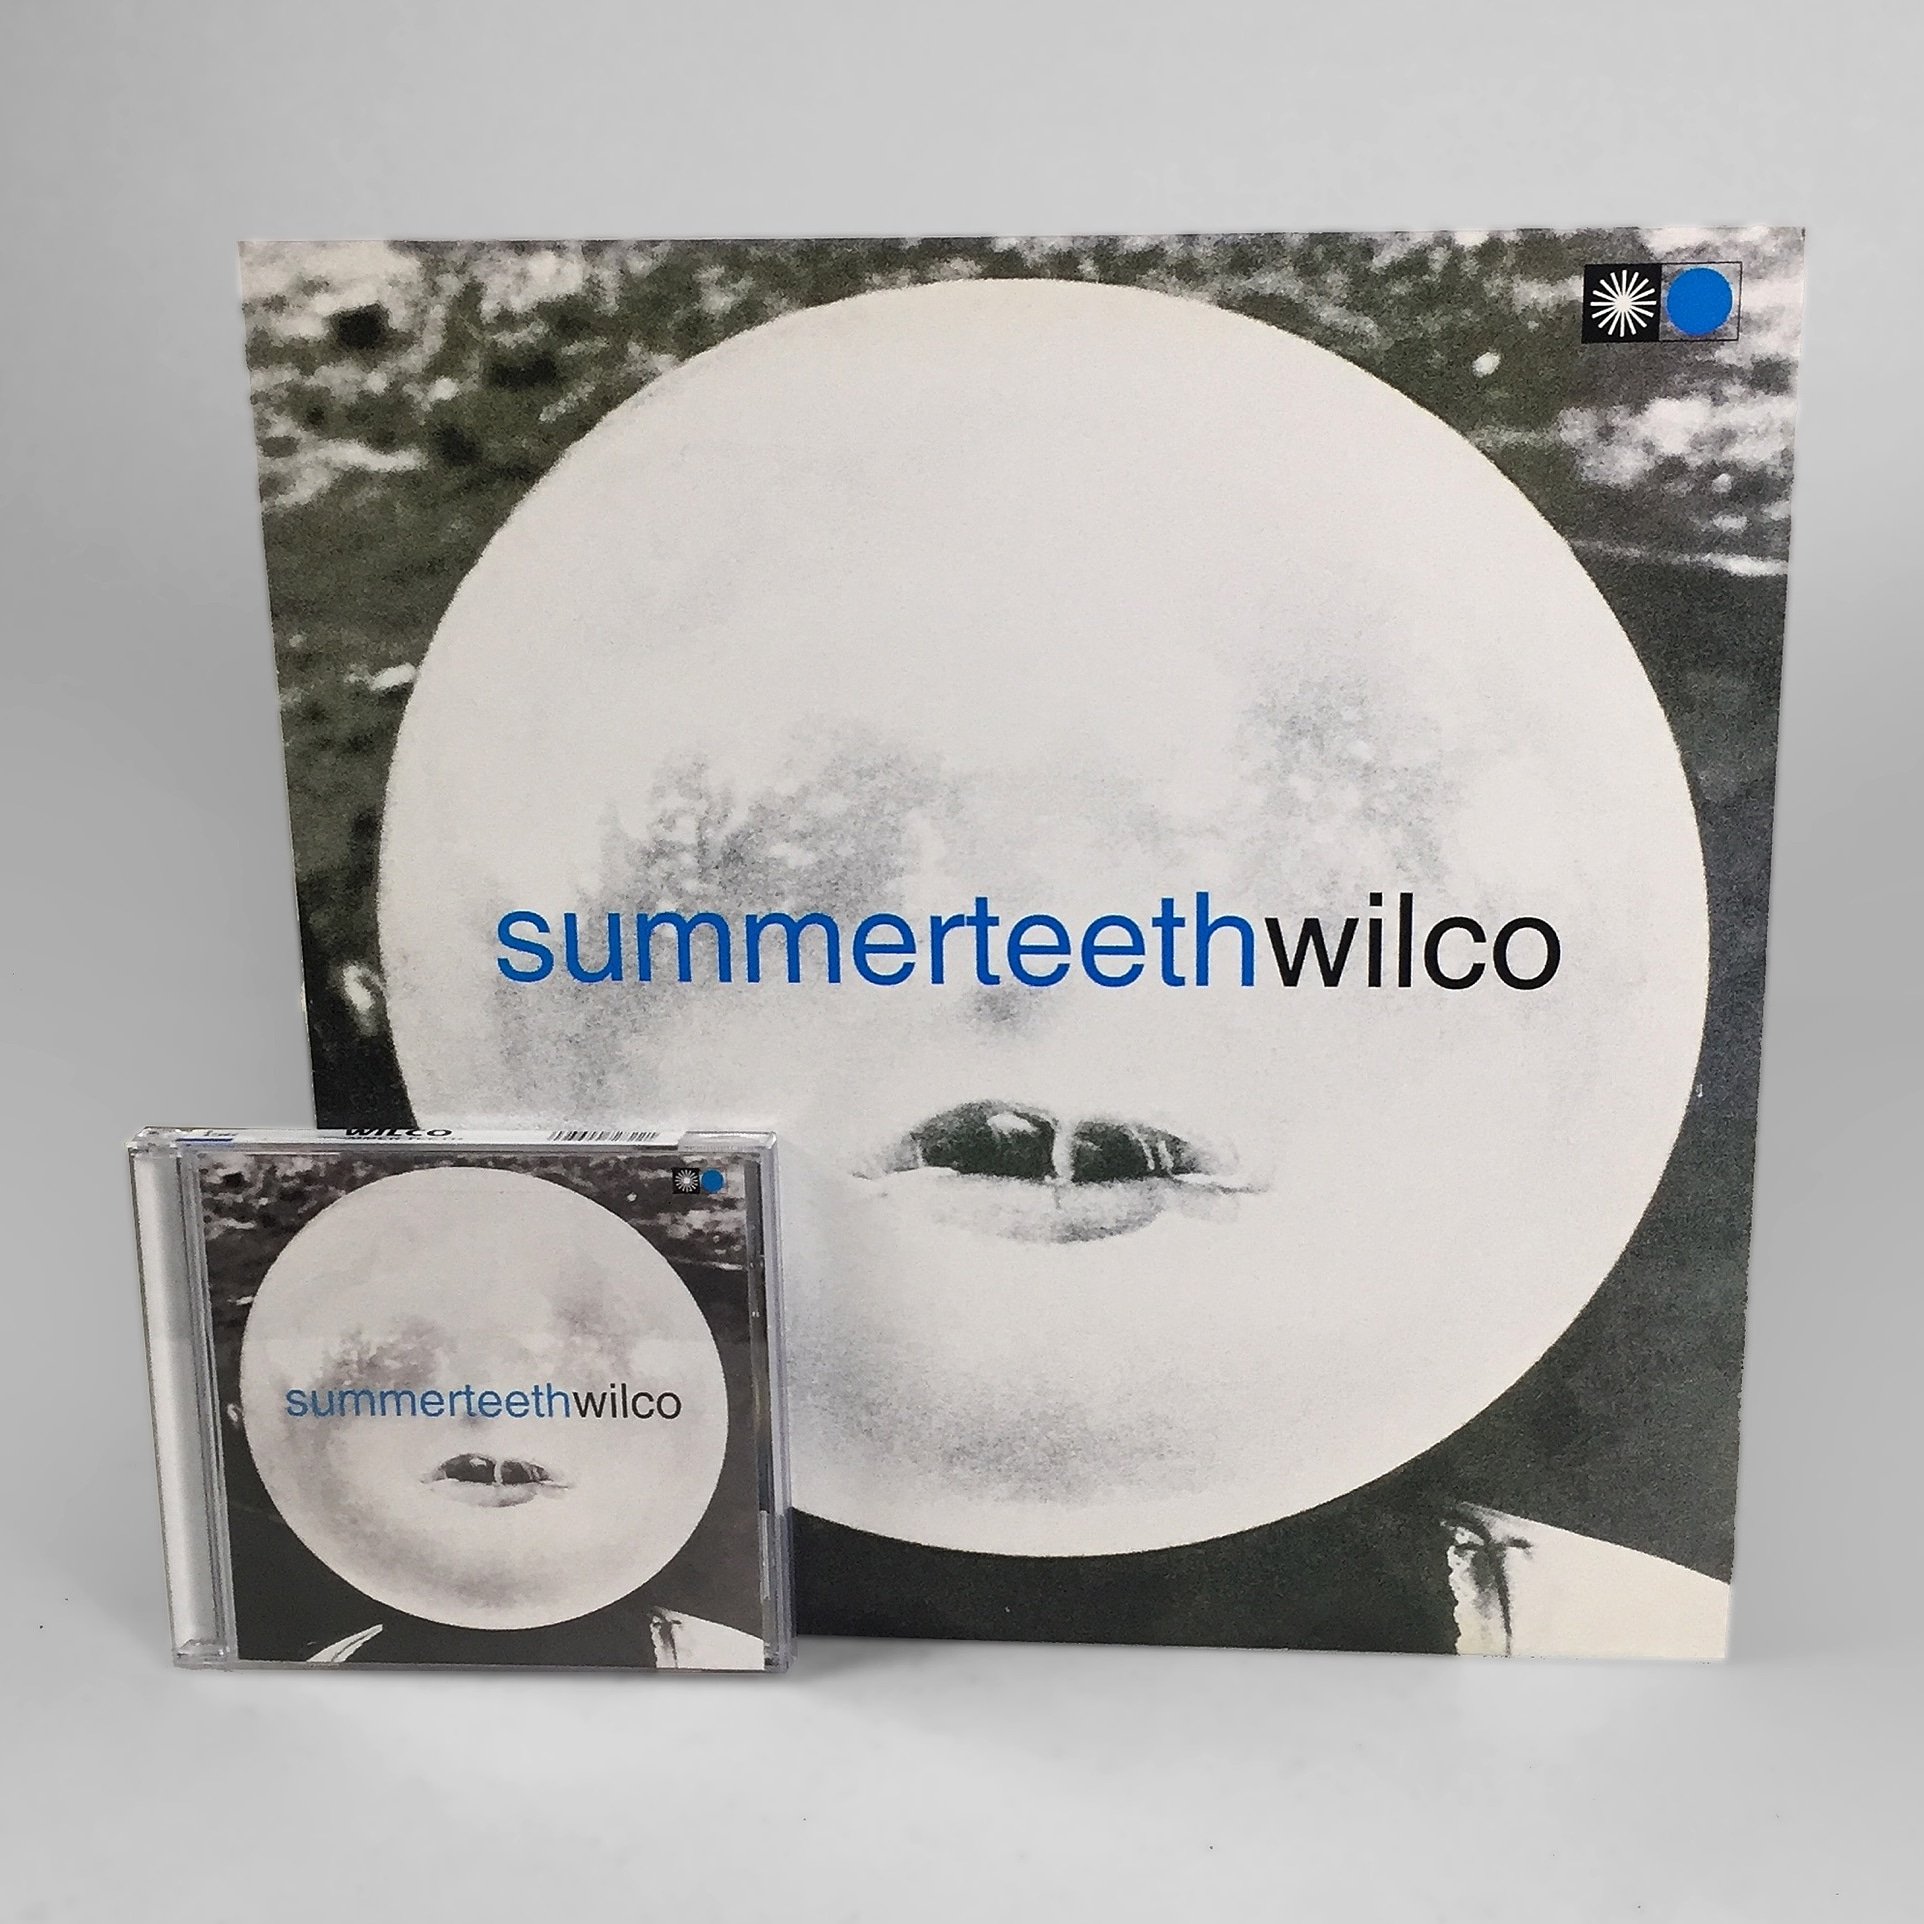 WILCO on X: "Today Summerteeth turns 20. Where were you when you first  heard it? PS. The vinyl and CD are 20% off through Monday in the Wilco  store. https://t.co/uHymfS0xXe" / X